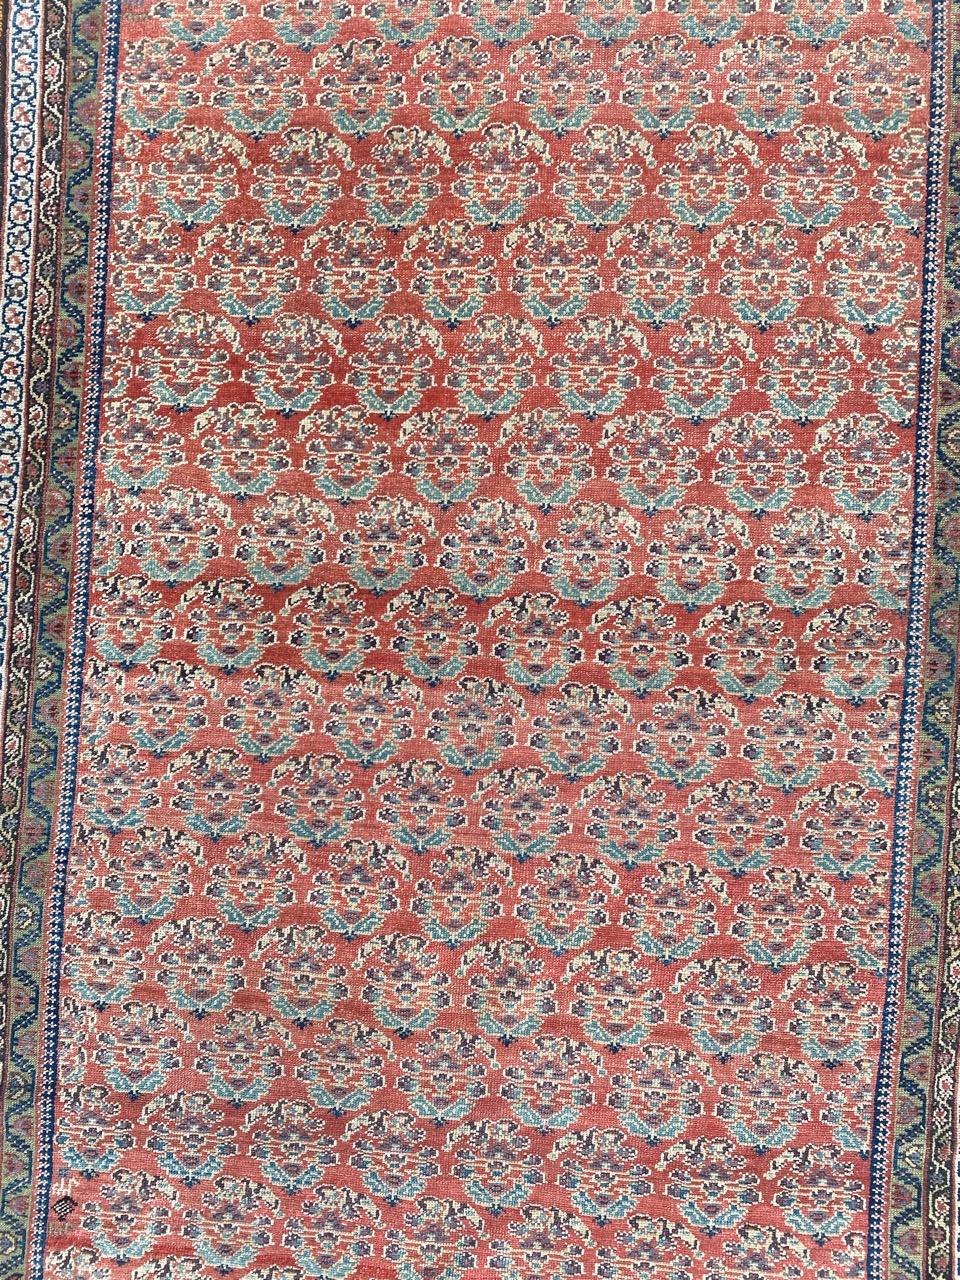 Very pretty late 19th century fine malayer rug with nice botteh design and beautiful natural colors, entirely and finely hand knotted with wool velvet on cotton foundation.

✨✨✨
